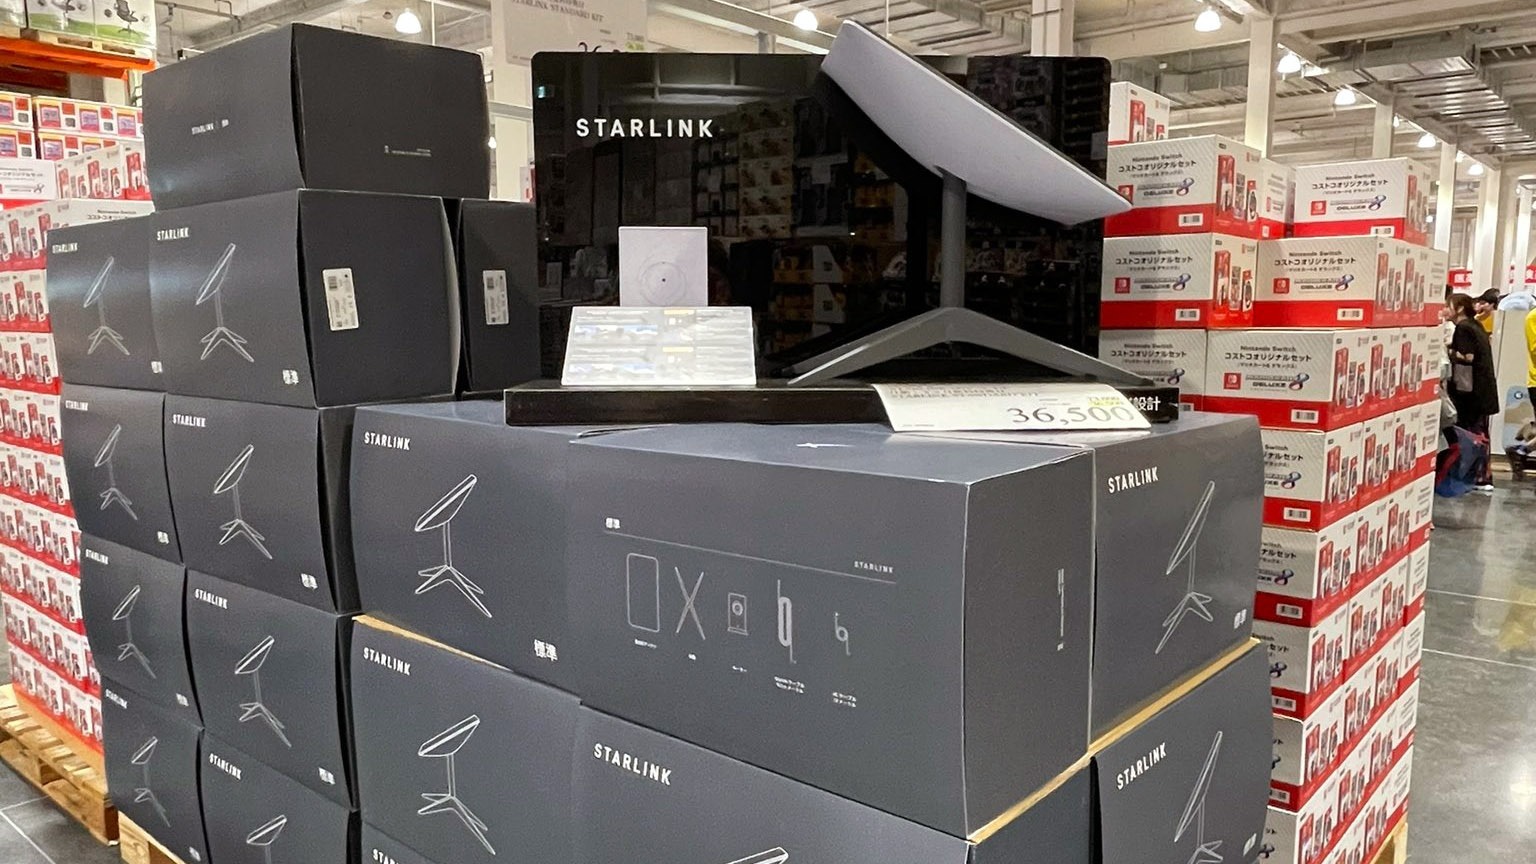 Starlink satellite Internet kits now sold in Costco with free subscription months for club members